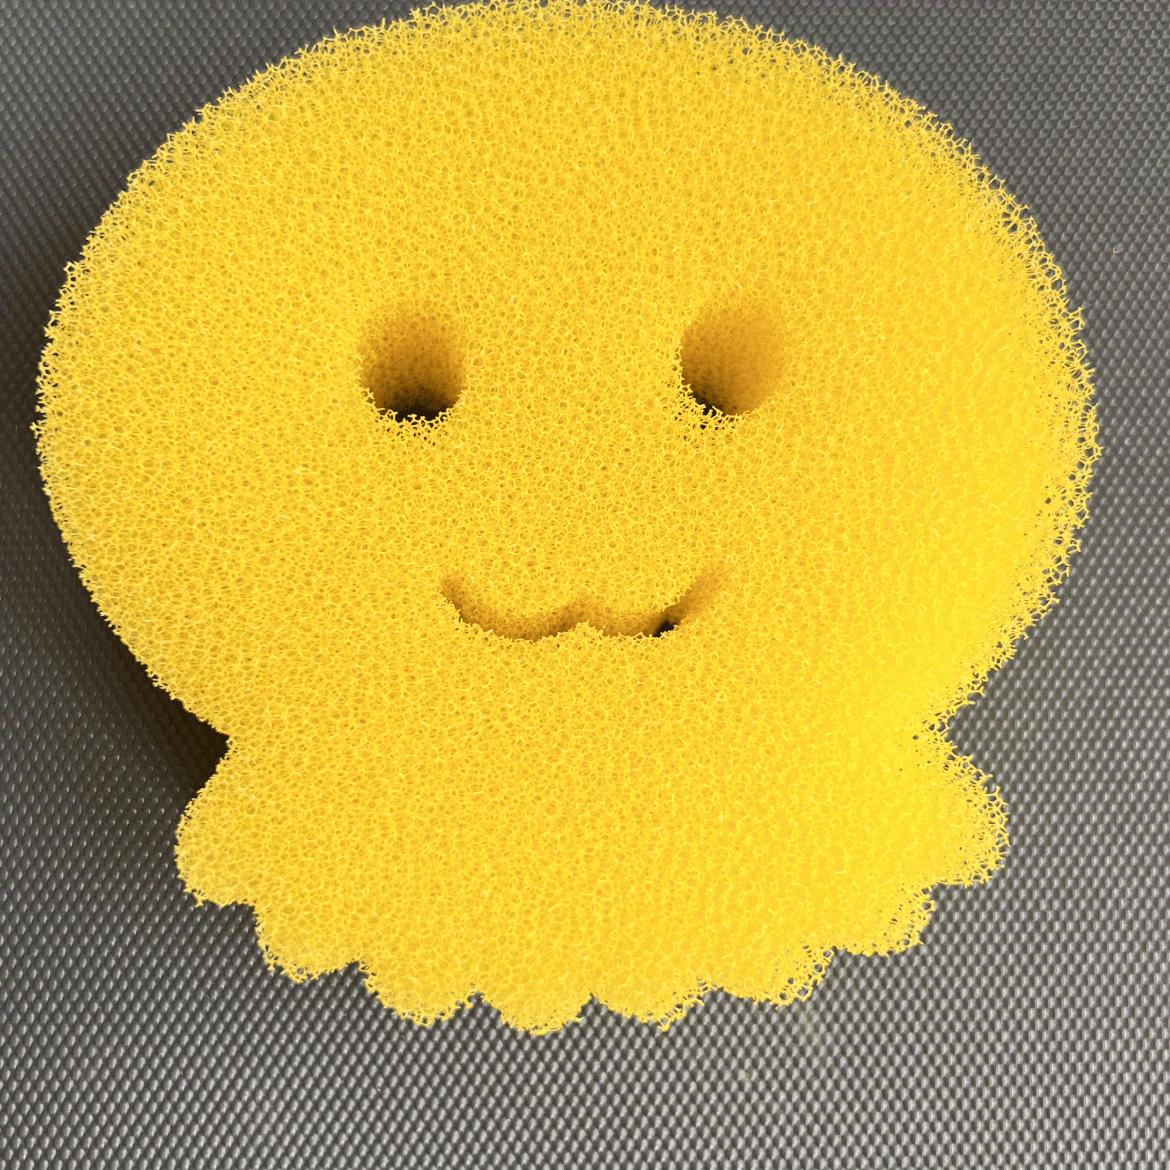 sponge with a happy face｜TikTok Search